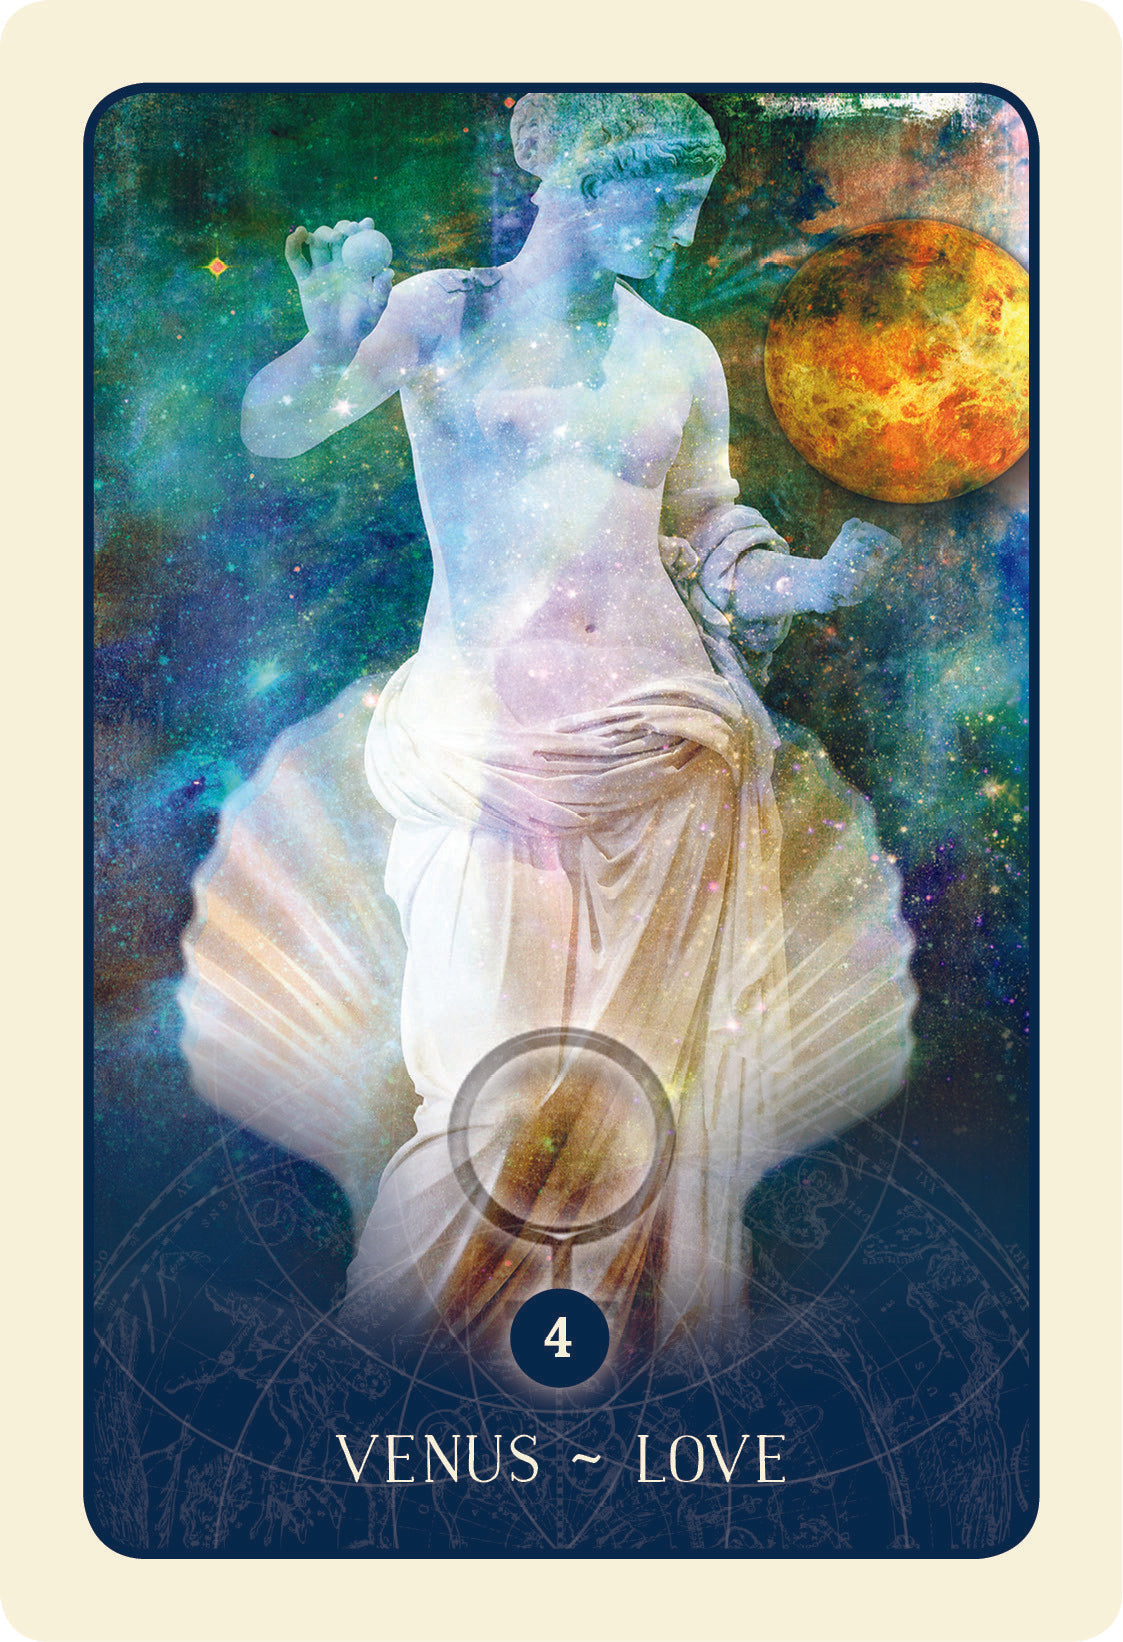 card labeled " venus - love." Image depicts the goddess Aphrodite holding the planet Venus in her hands. 